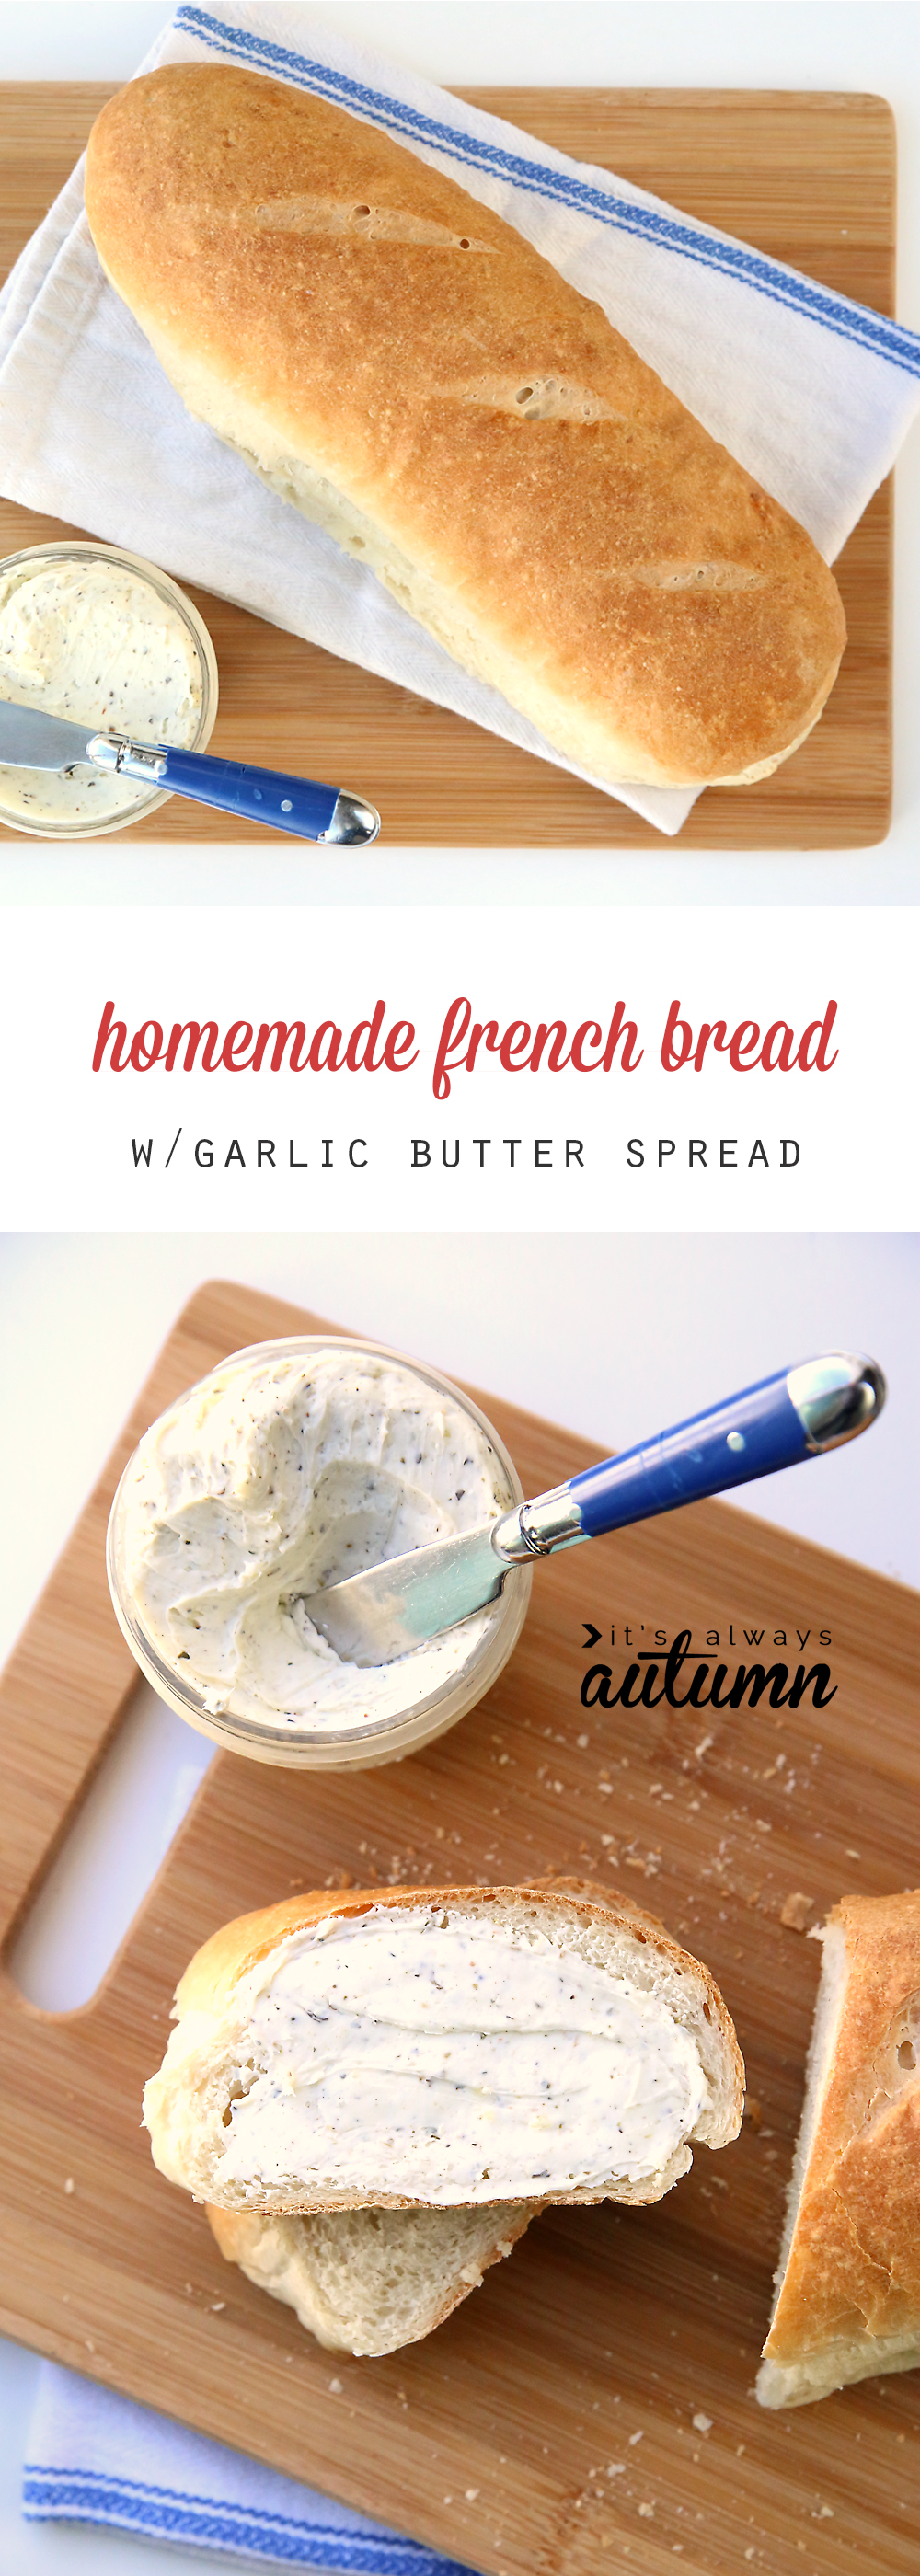 You can make amazing french bread at home with this fool proof recipe! Easy to follow step by step video included.